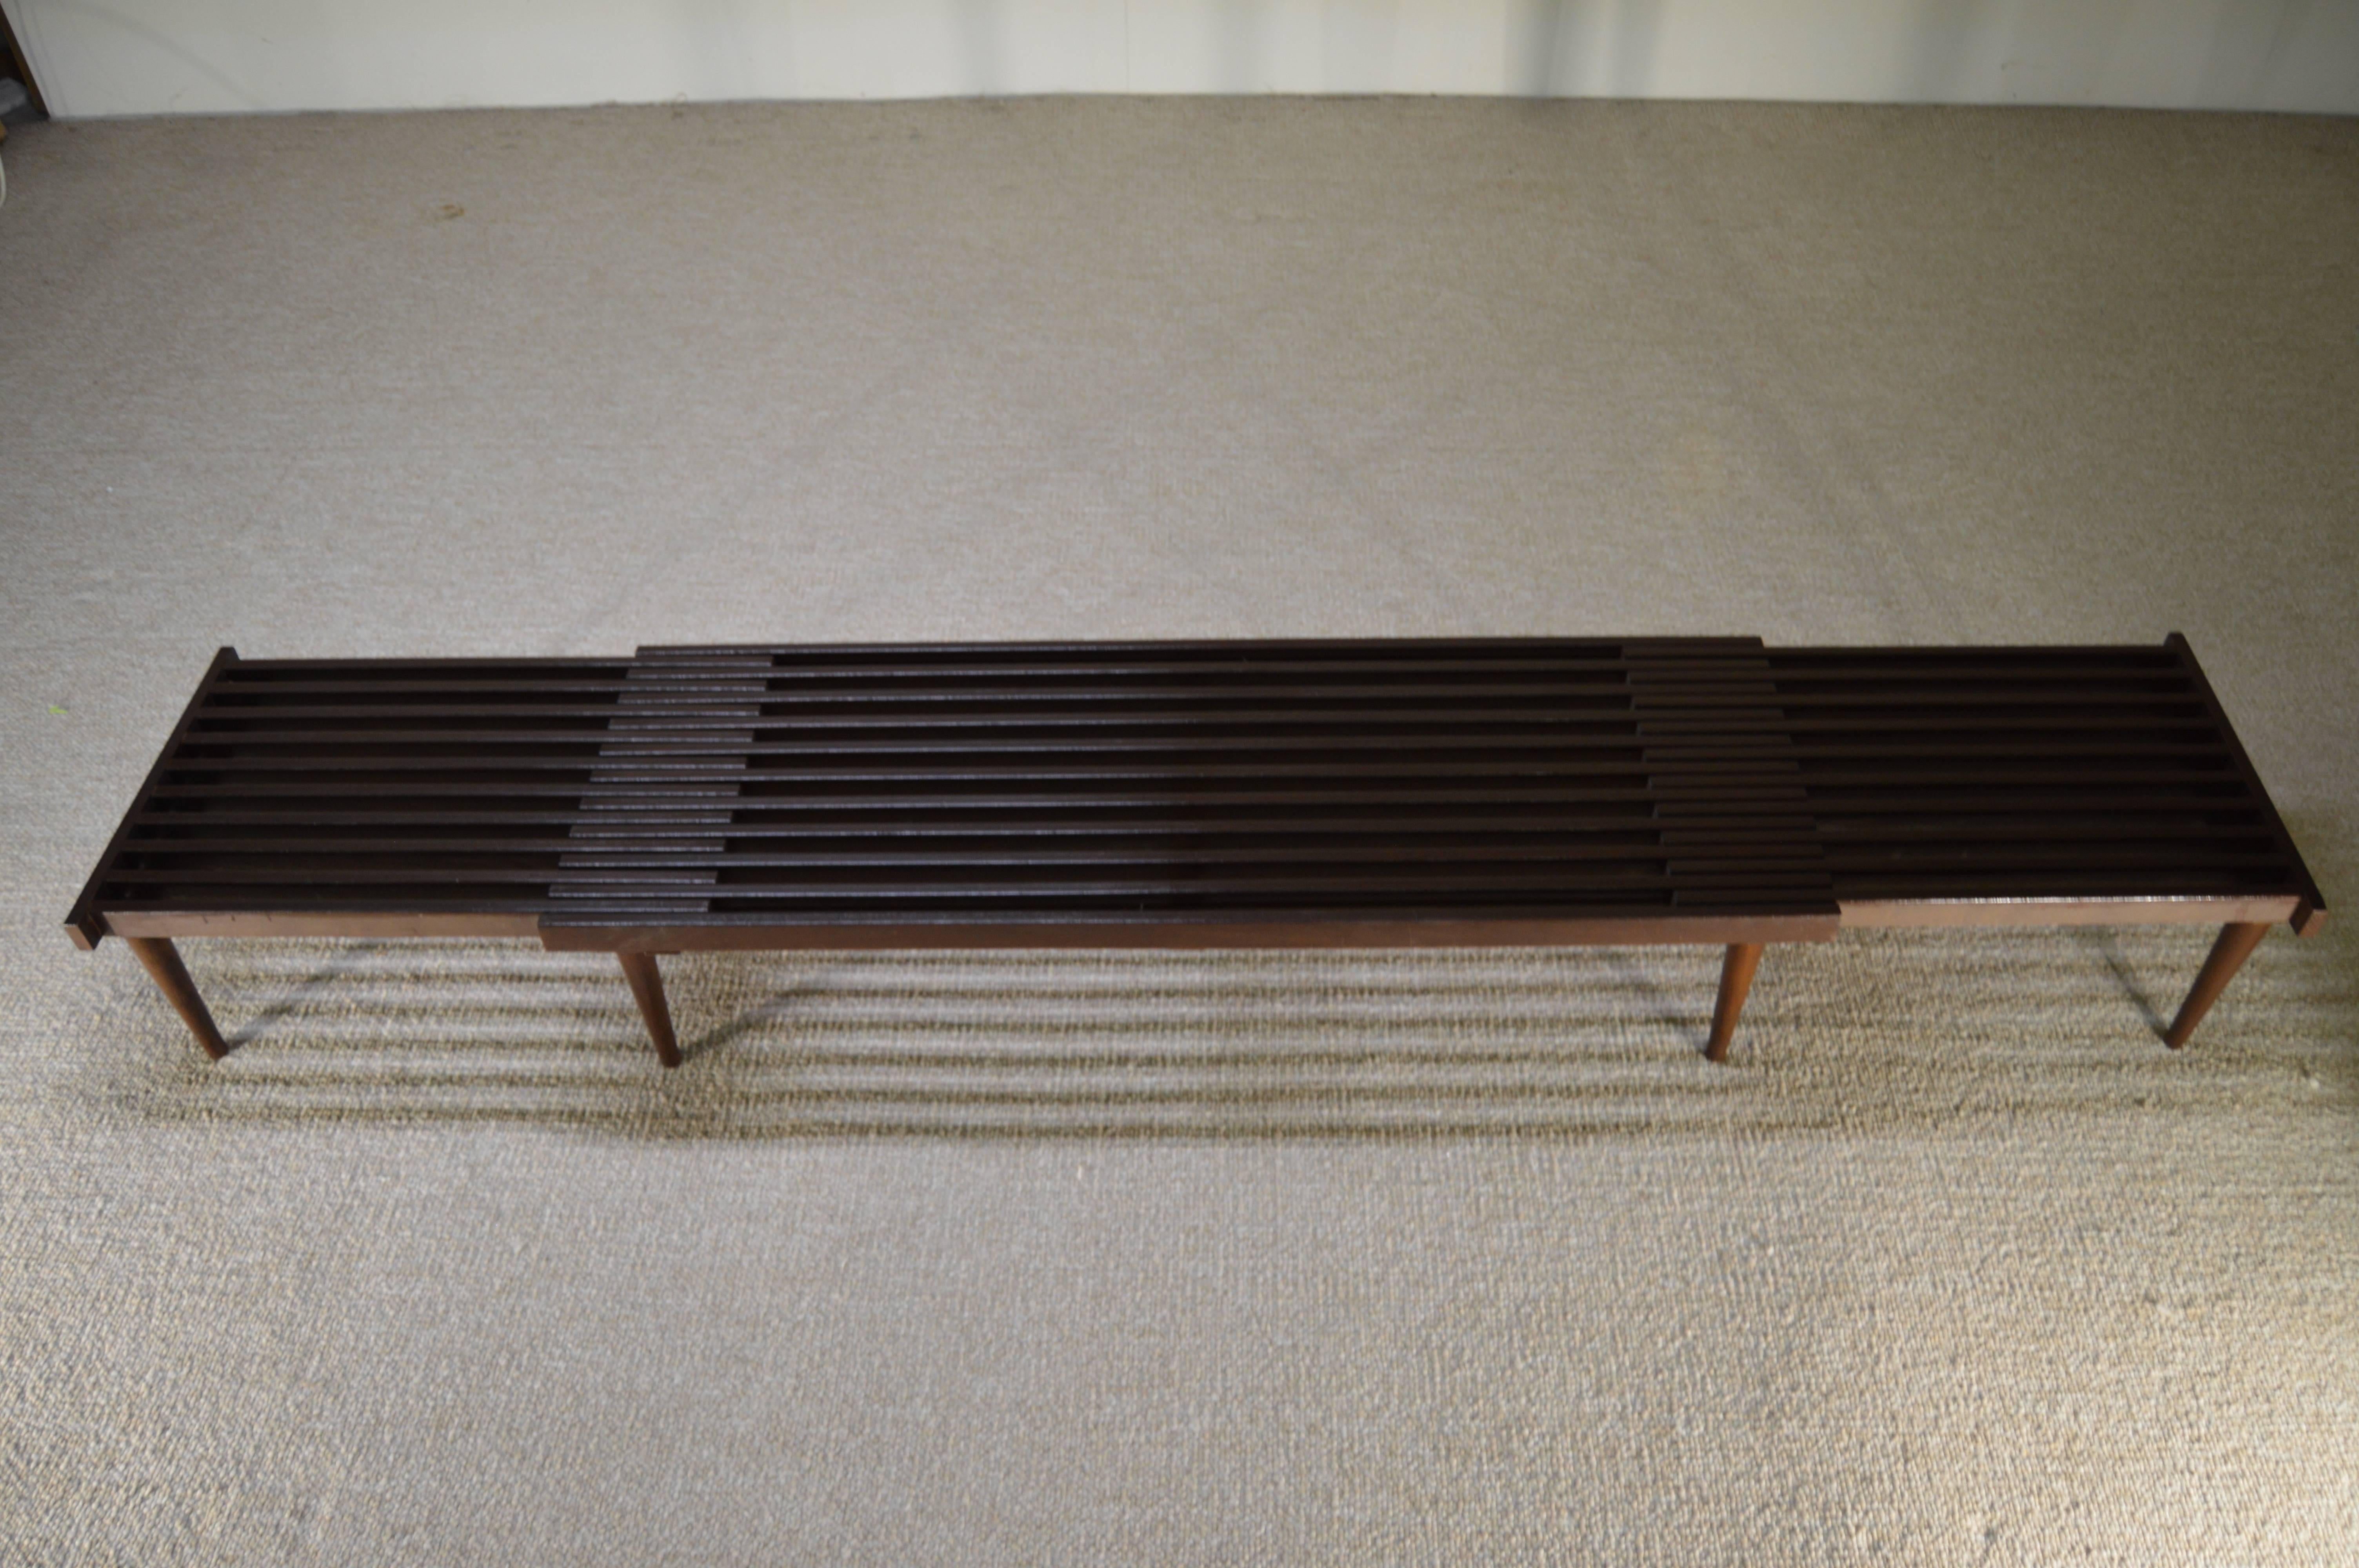 A stunning expandable sliding slat bench designed by John Keal for Brown Saltman.
Measures: Can expand from 61